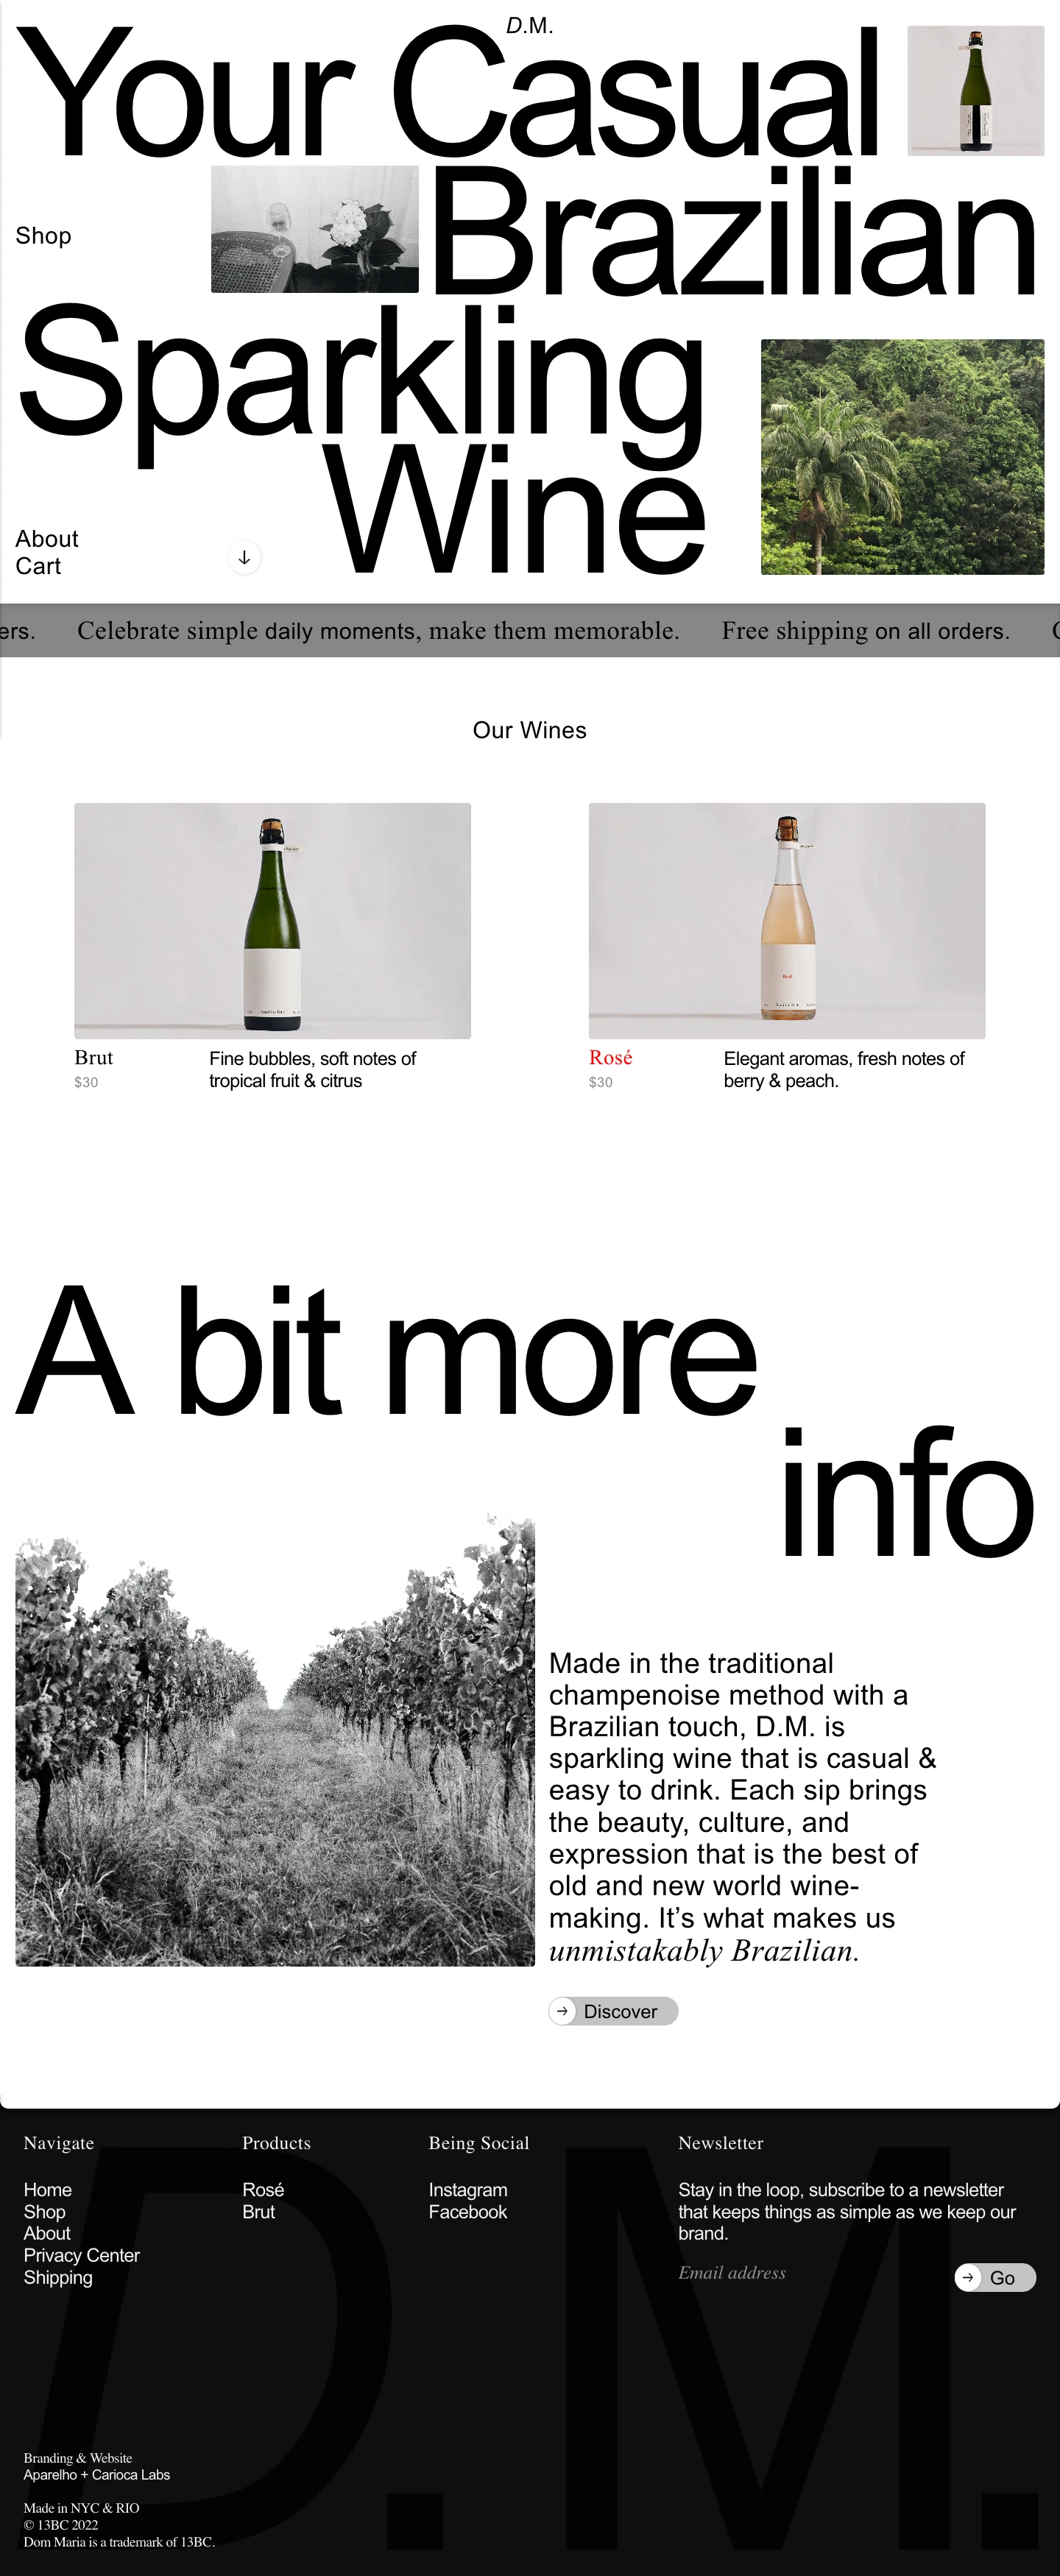 D.M Brut Landing Page Example: Made in the traditional champenoise method with a Brazilian touch, D.M. is sparkling wine that is casual & easy to drink. Each sip brings the beauty, culture, and expression that is the best of old and new world wine-making. It’s what makes us unmistakably Brazilian.